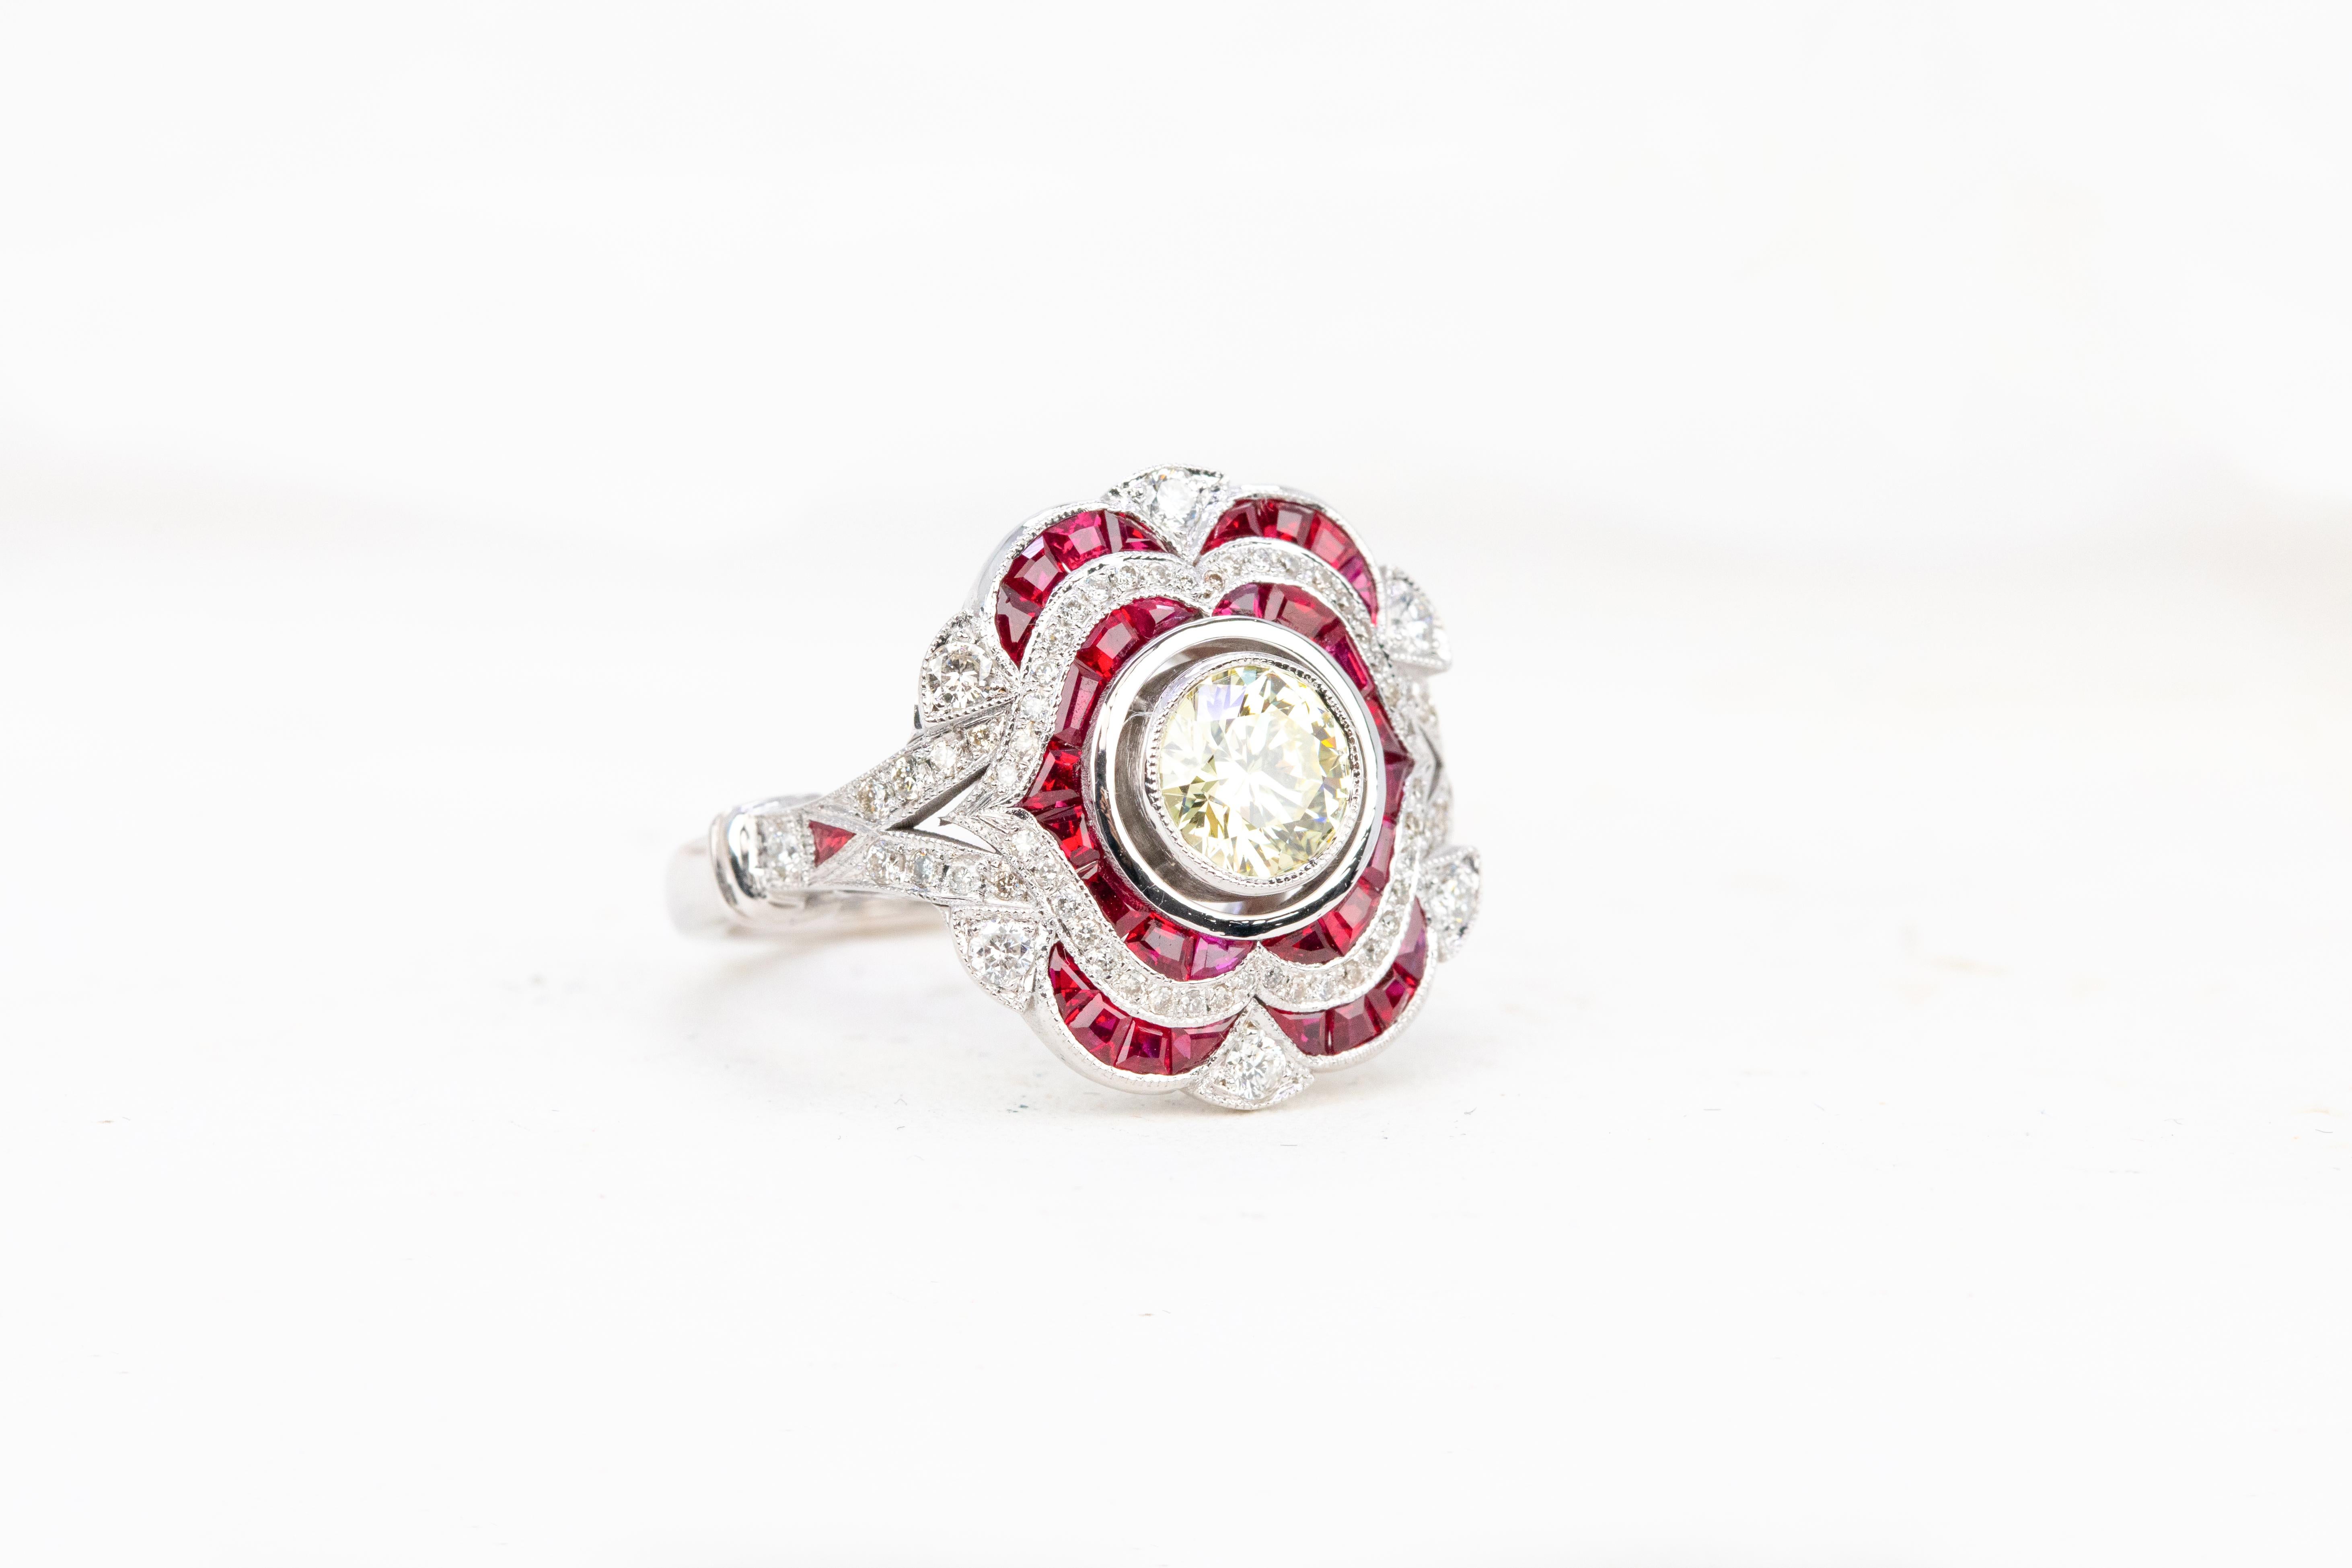 18K Gold Art Deco 0.75 ct. Diamond and Ruby Cocktail Ring

This ring was made with quality materials and excellent handwork. I guarantee the quality assurance of my handwork and materials. It is vital for me that you are totally happy with your